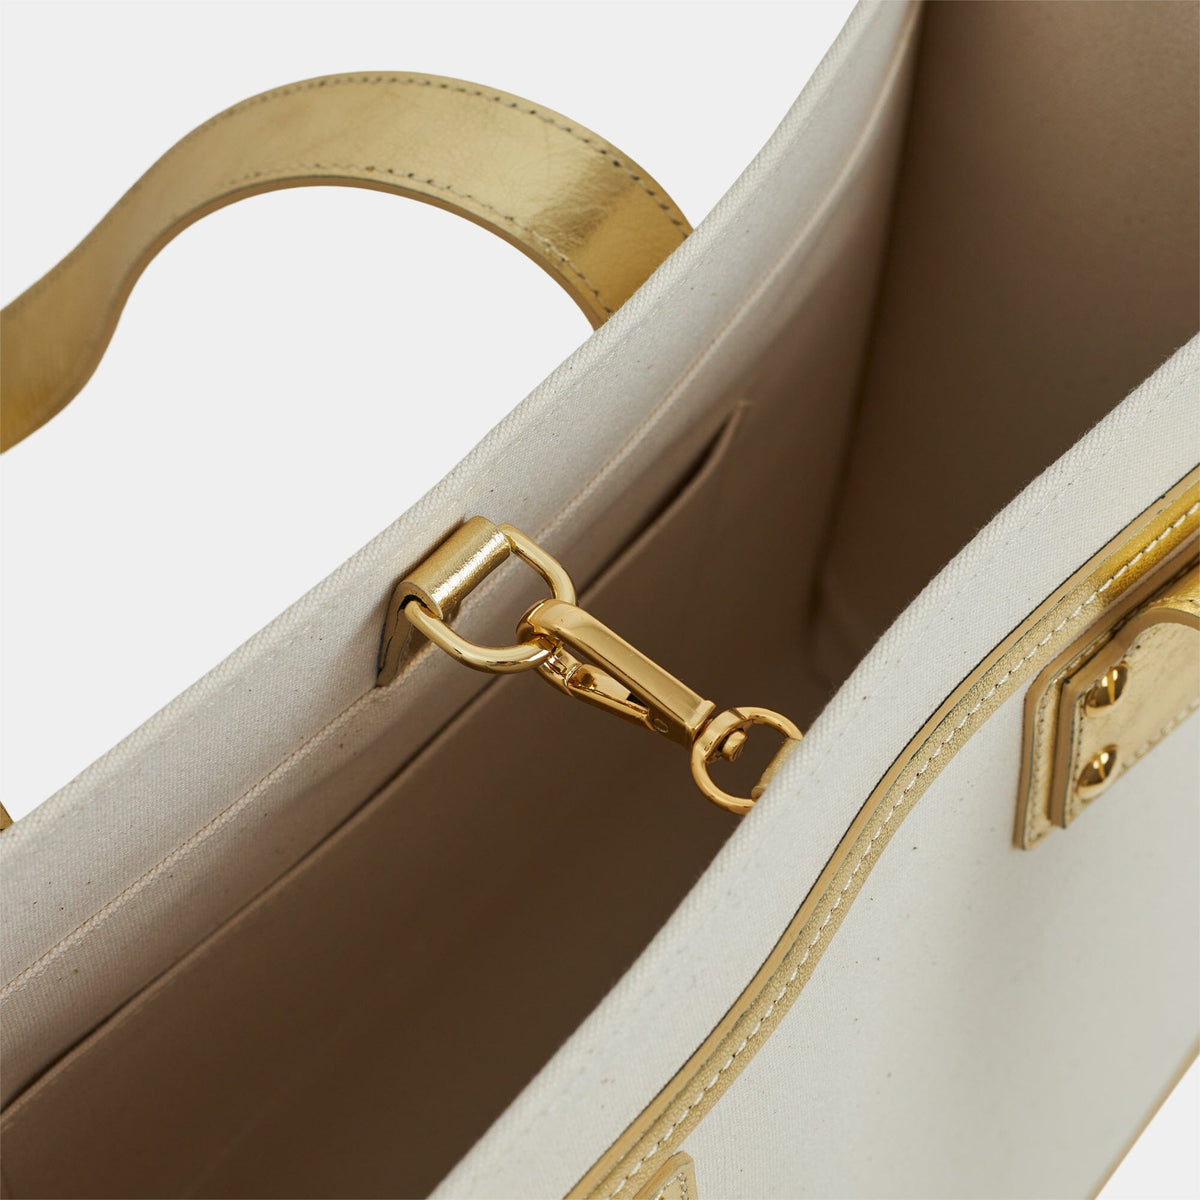 The Navigator - Gold Tote